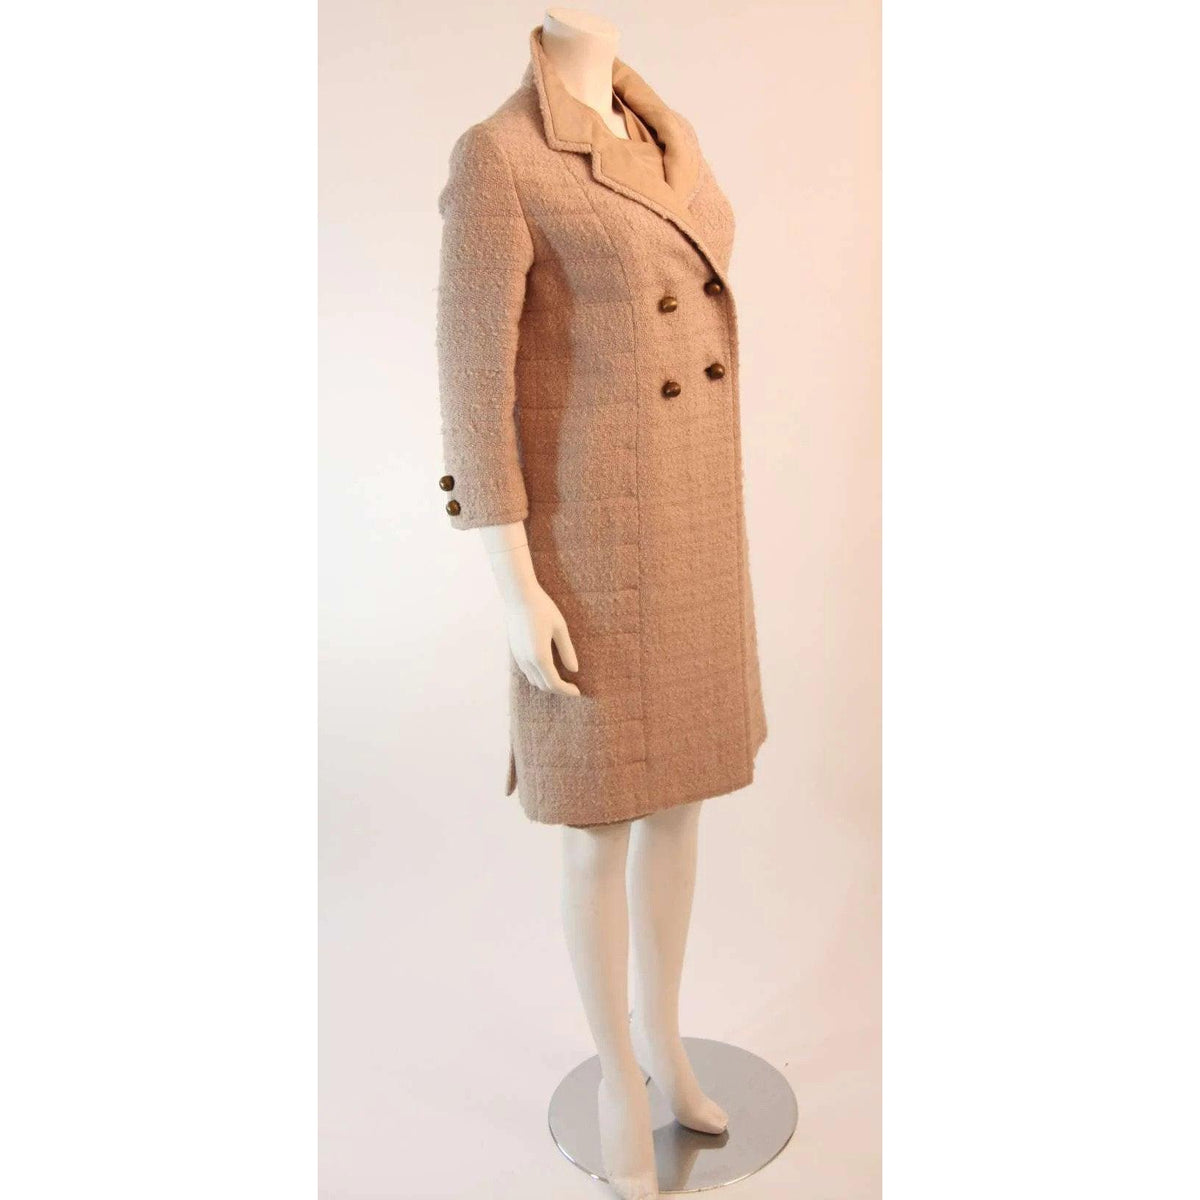 Pre-Owned CHANEL 1960s Attributed to Chanel Cream Boucle 3 pc Tweed Suit | Size 37 - theREMODA